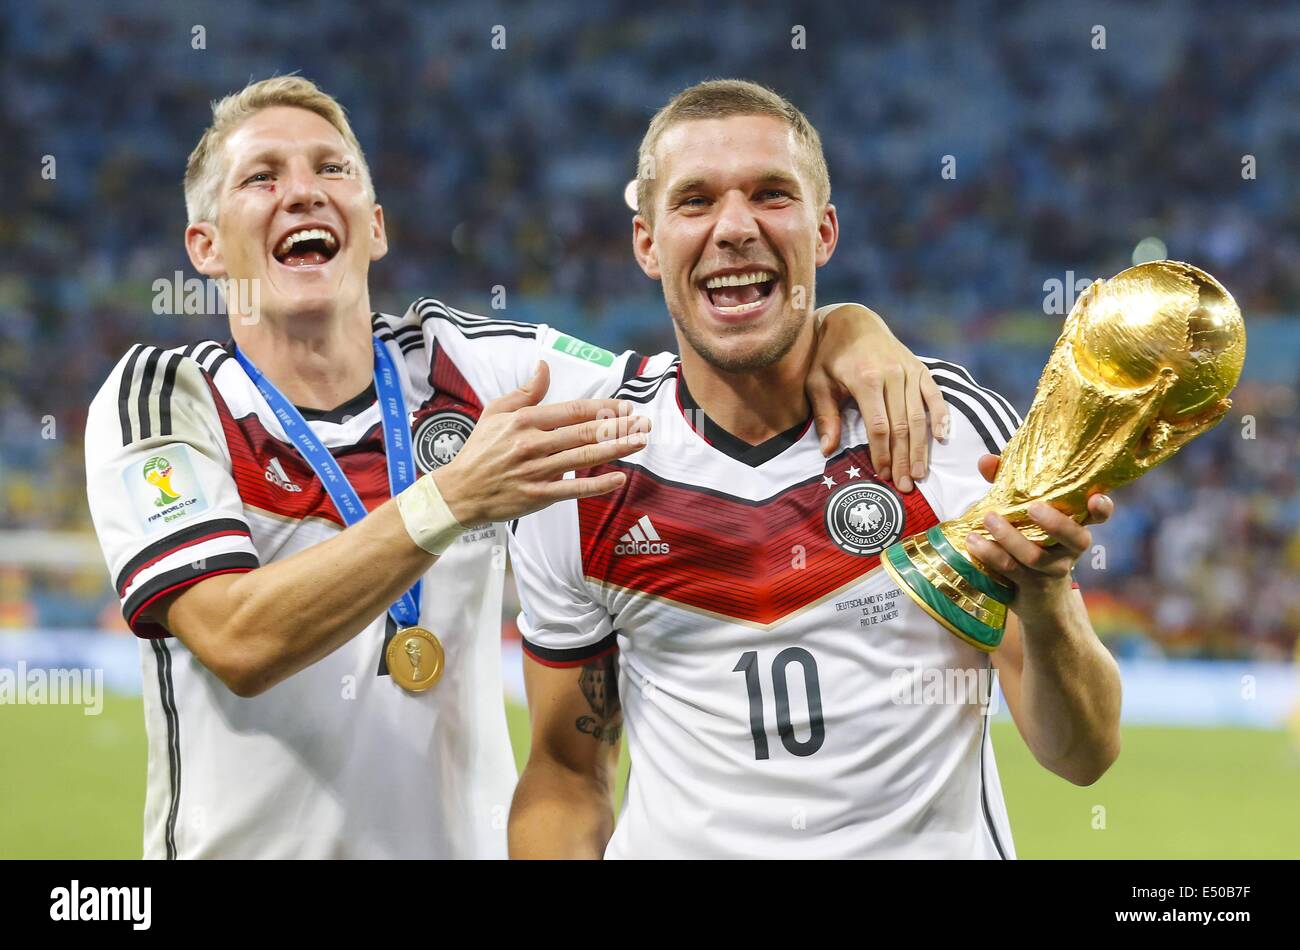 Rio de Janeiro, Brazil. 13th July, 2014. World Cup Final. Germany versus Argentina. Bastian Schweinsteiger and Lukas Podolski holding the World Cup Trophy © Action Plus Sports/Alamy Live News Stock Photo